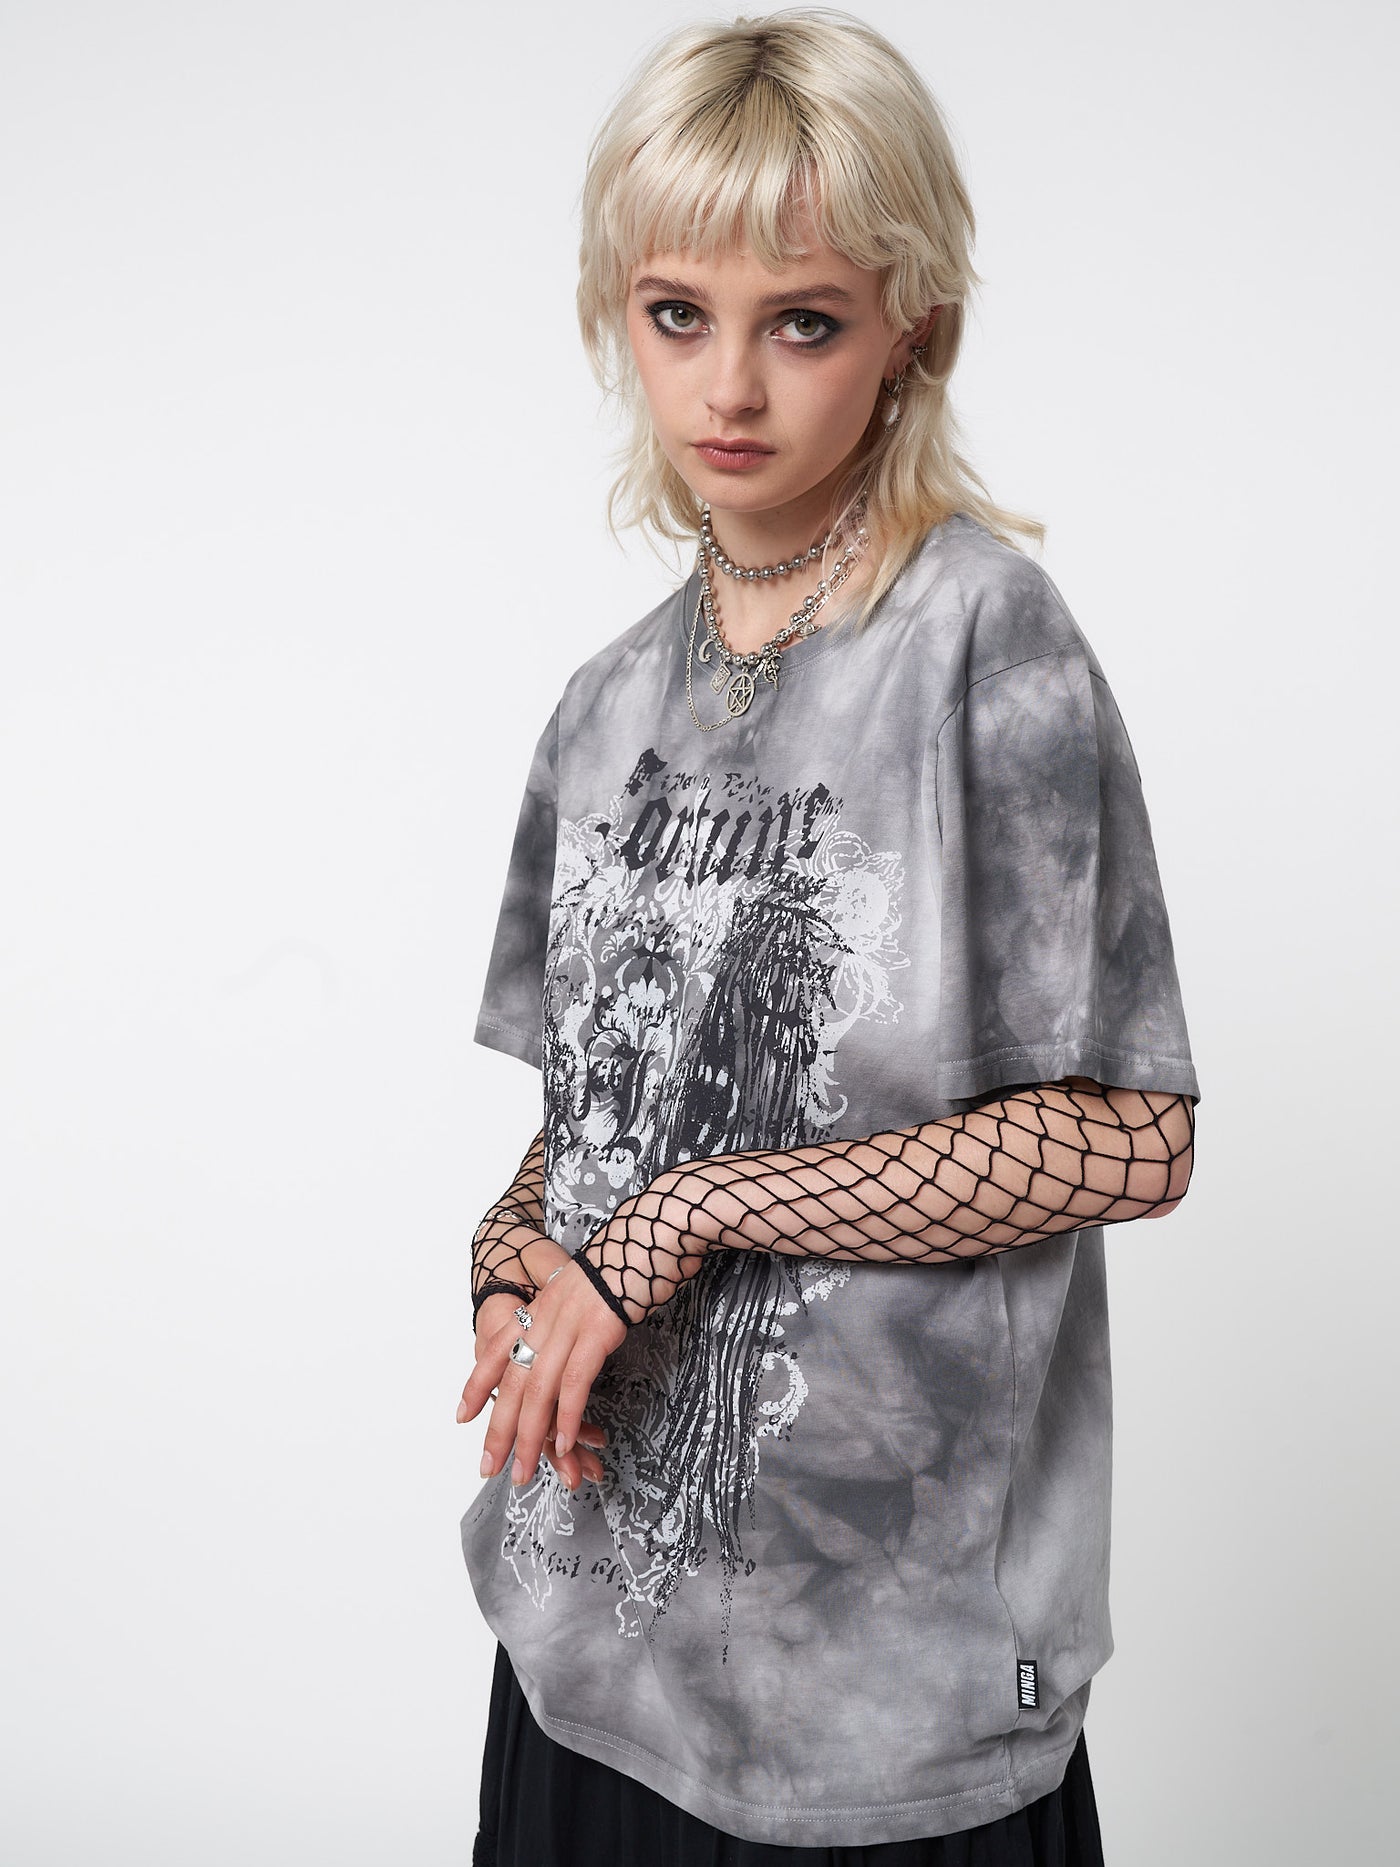 Tie dye t-shirt in grey with fortune wings front print